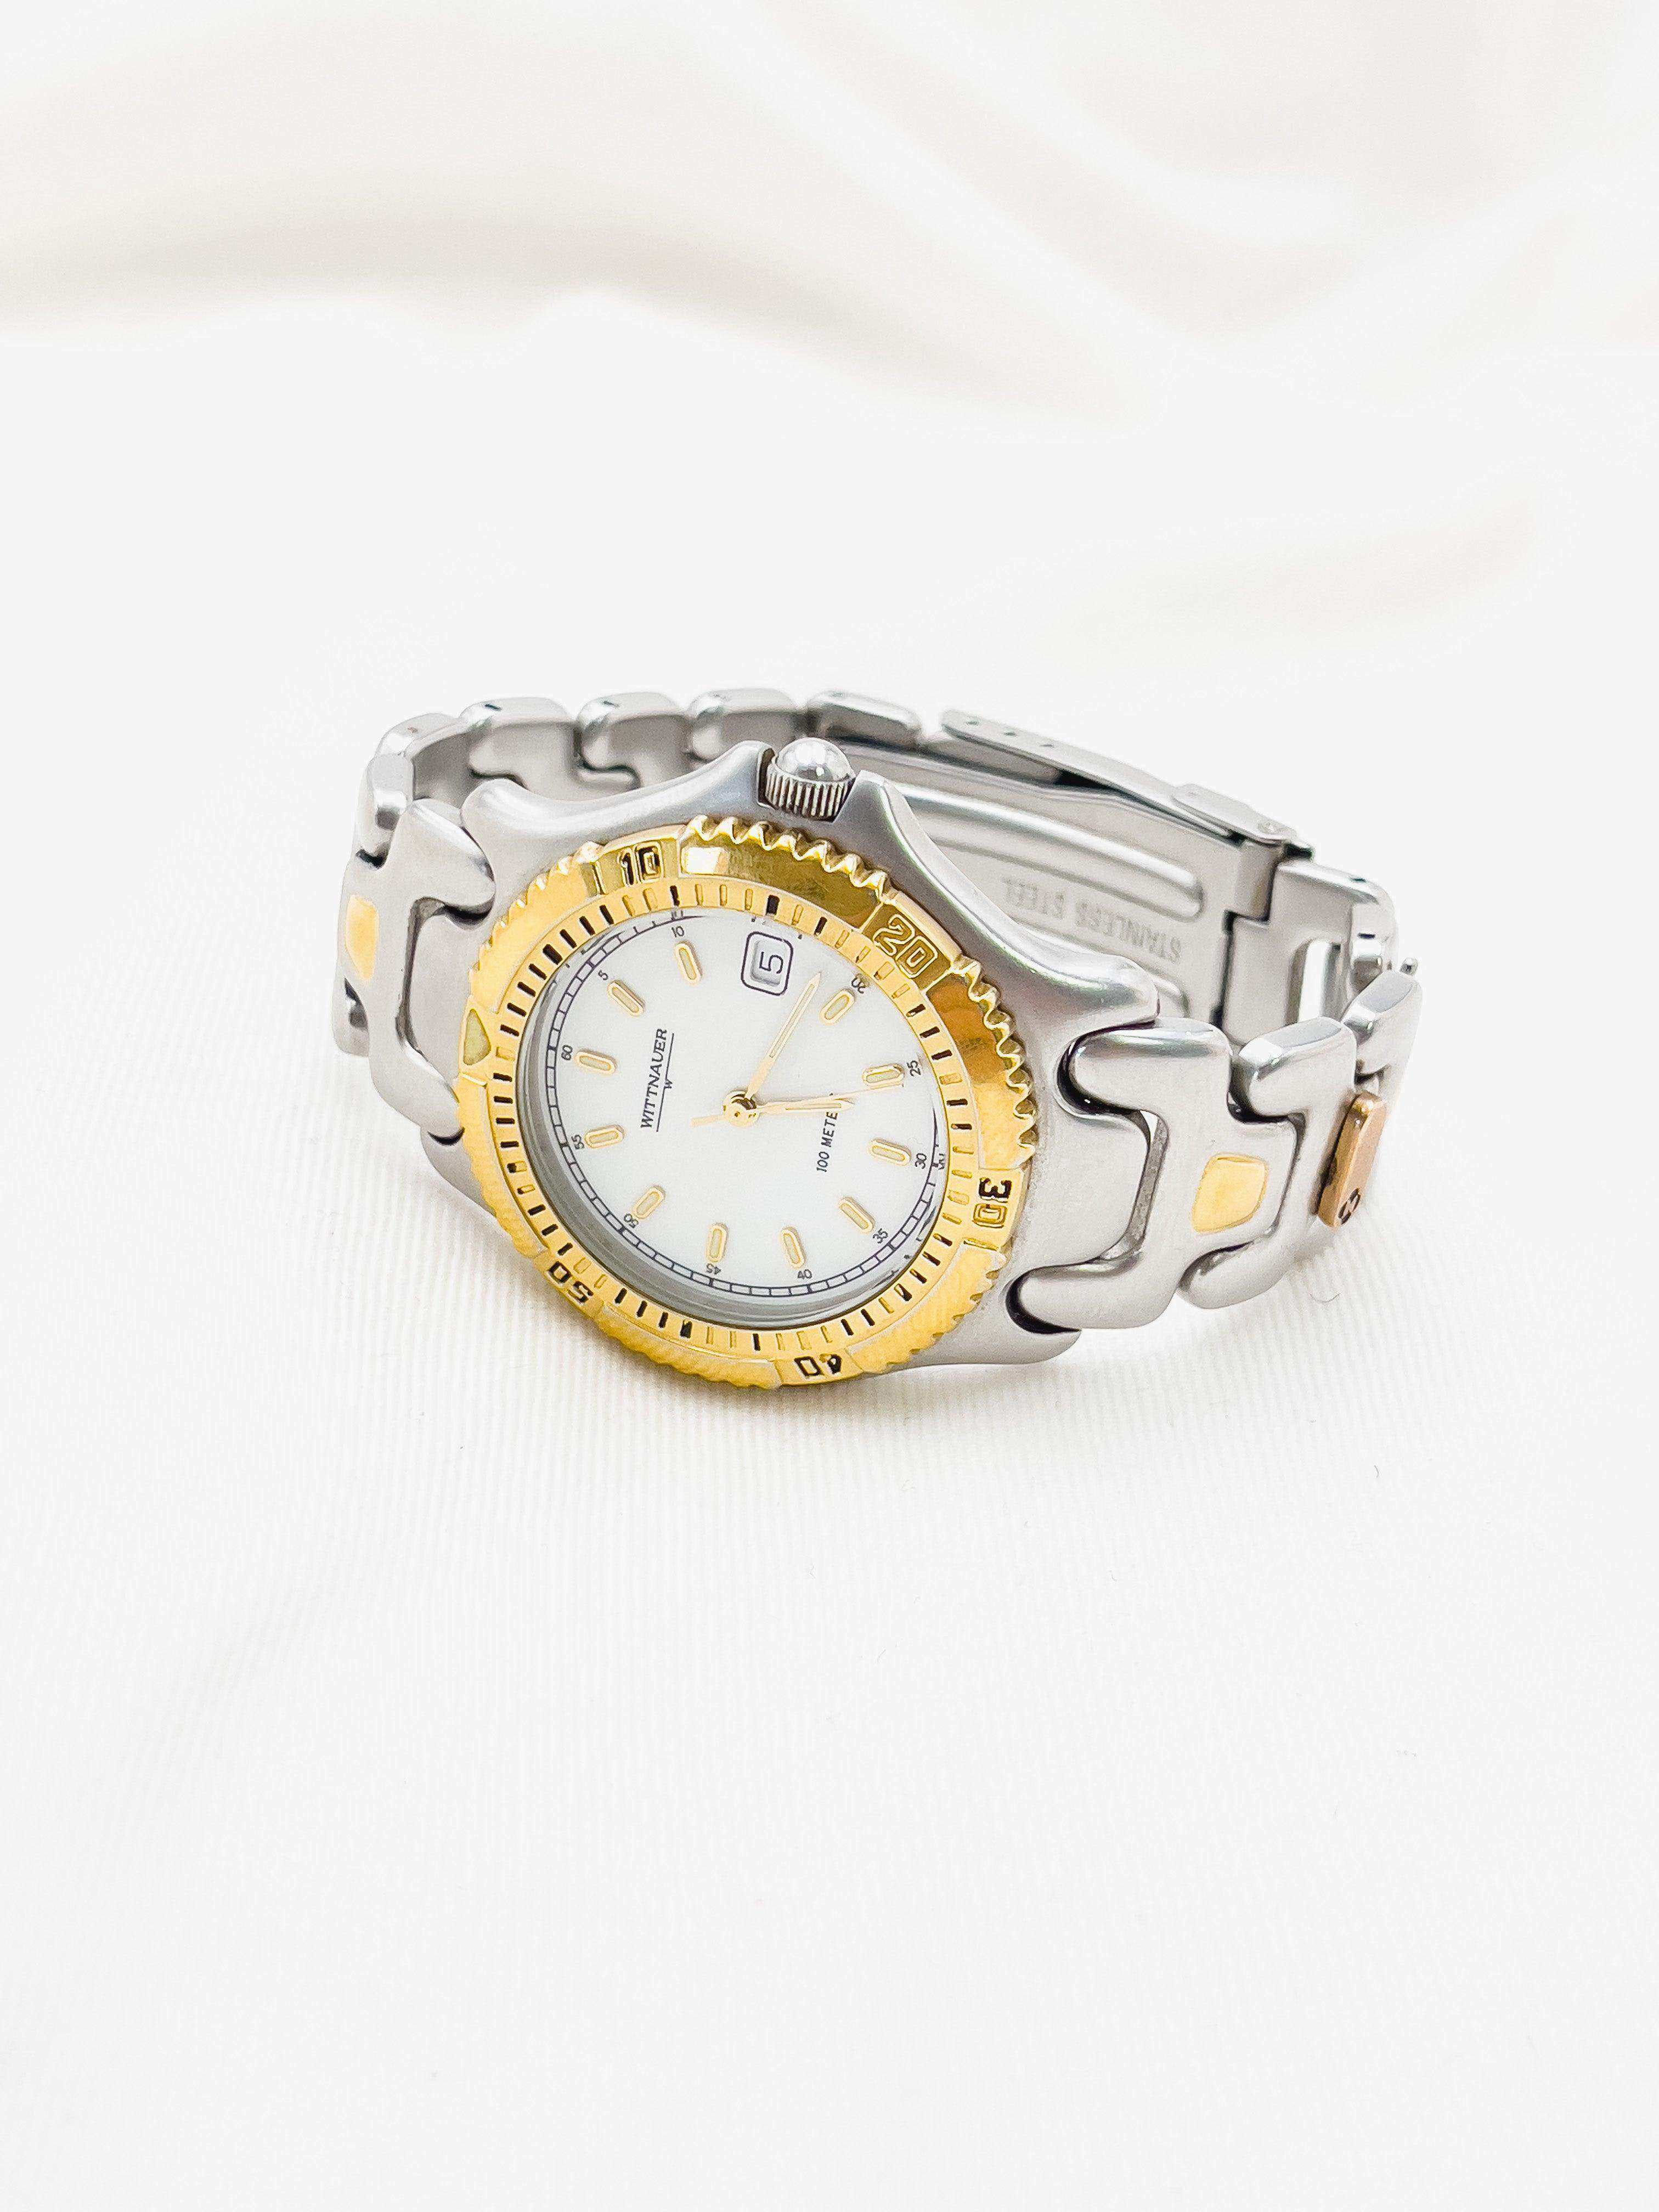 Wittnauer by Longines - Acier / Plaqué or - 1990/00’s - Atelier Victor